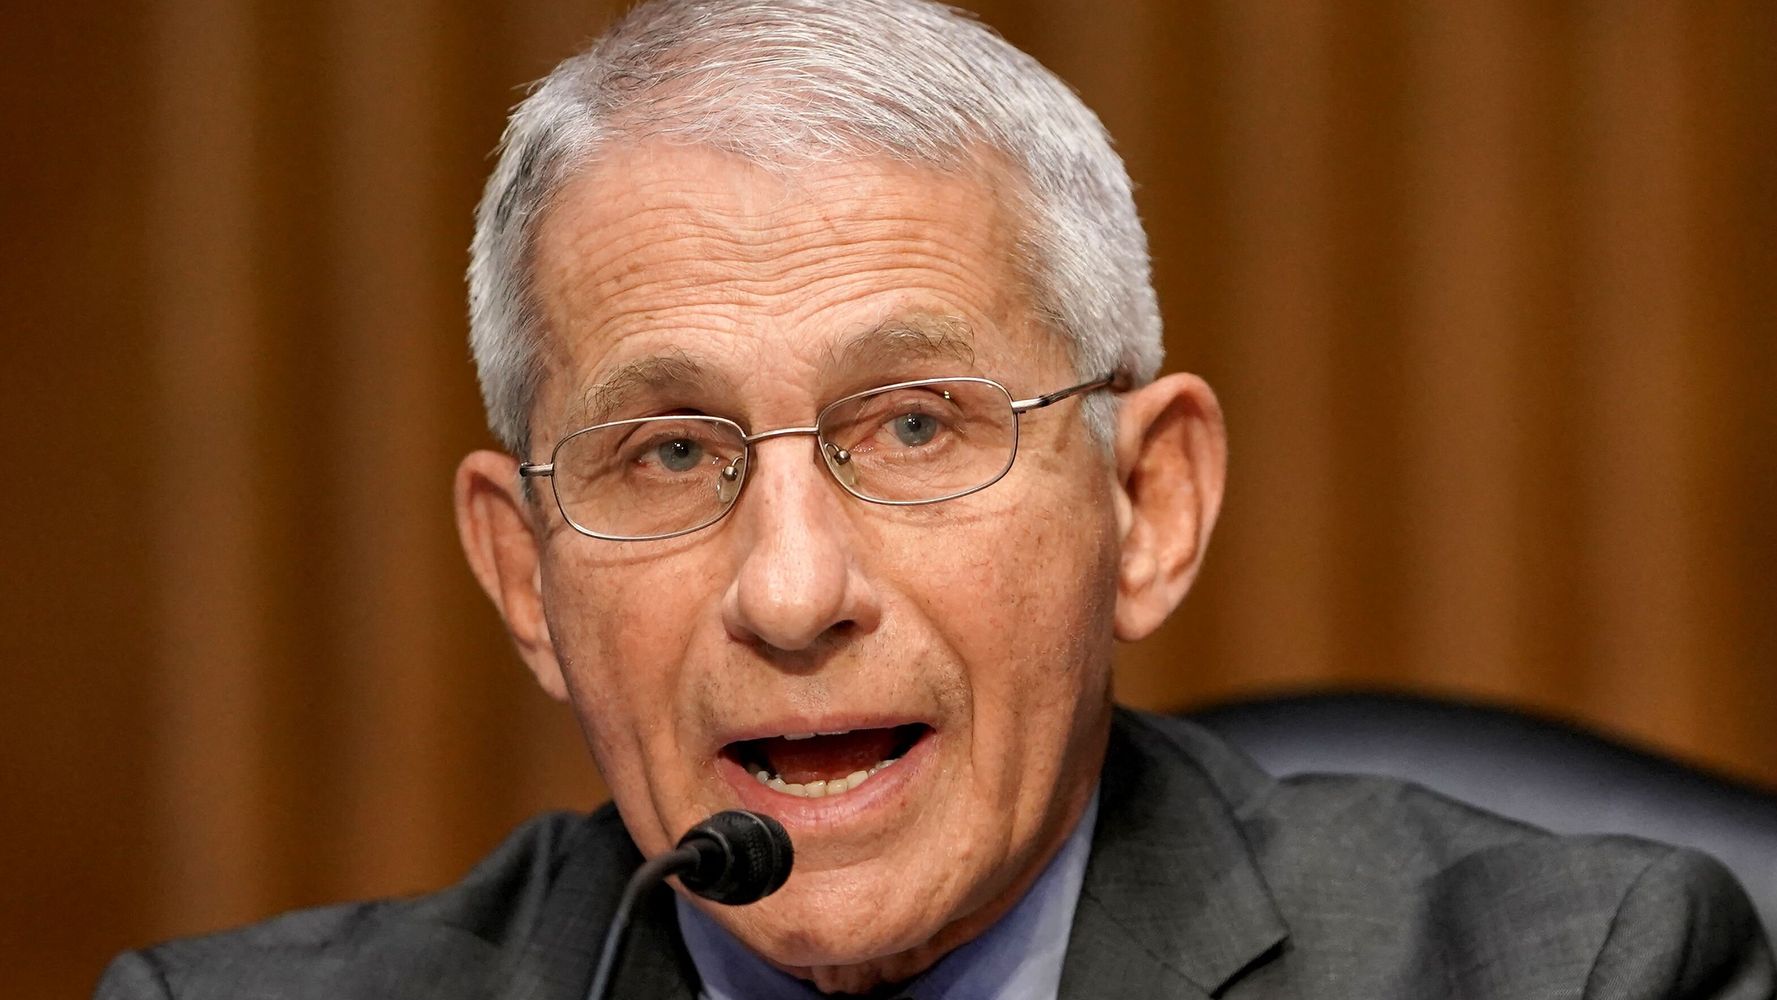 Anthony Fauci Went Through Scary Decontamination Process After Poison Scare, Book Claims